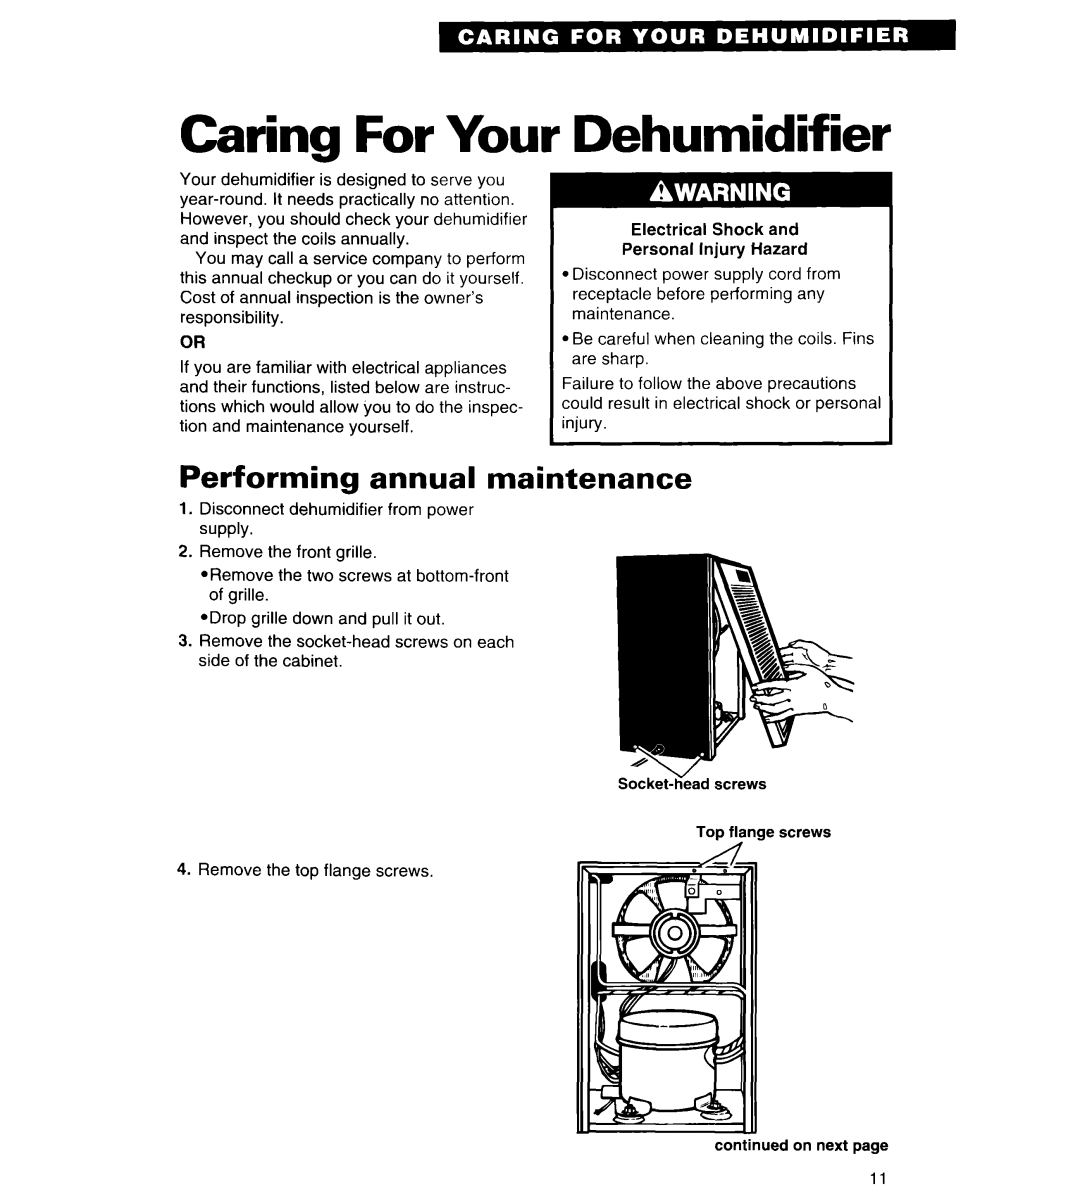 Whirlpool AD030, ADO25, AD050, AD040 Caring For Your, Dehumidifier, Performing annual maintenance 